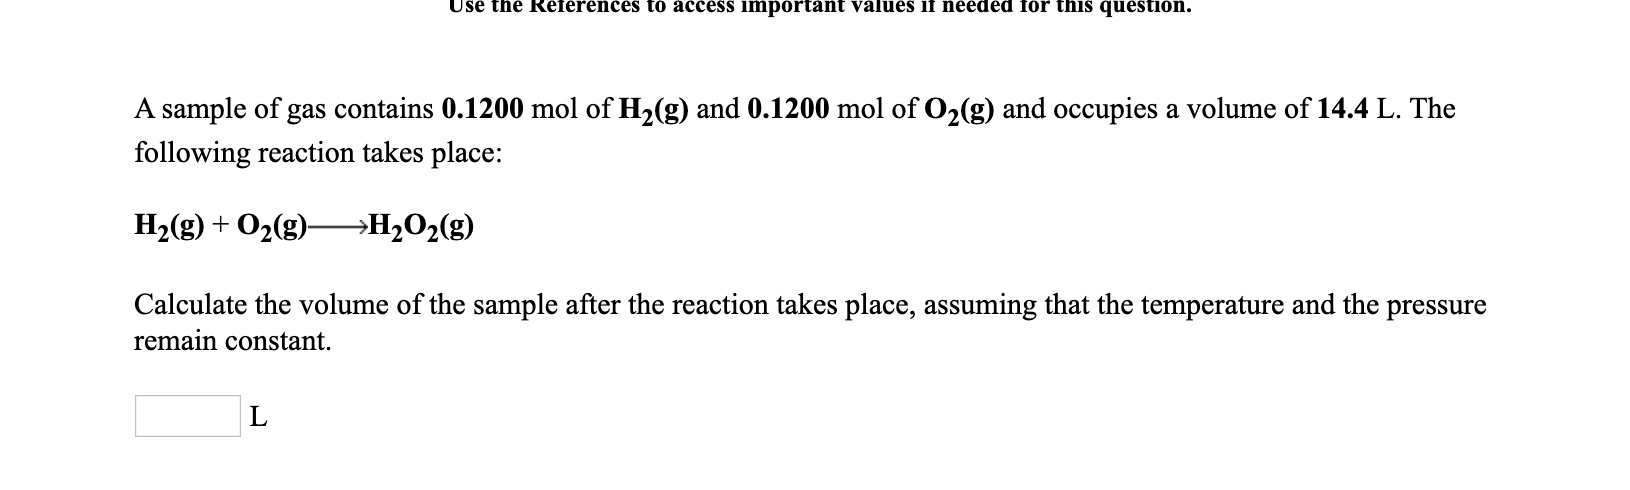 Use the References to access important values if needed for this question.
A sample of gas contains 0.1200 mol of H2(g) and 0.1200 mol of O2(g) and occupies a volume of 14.4 L. The
following reaction takes place:
H2(g) + O2(g)–→H2O2(g)
Calculate the volume of the sample after the reaction takes place, assuming that the temperature and the pressure
remain constant.
